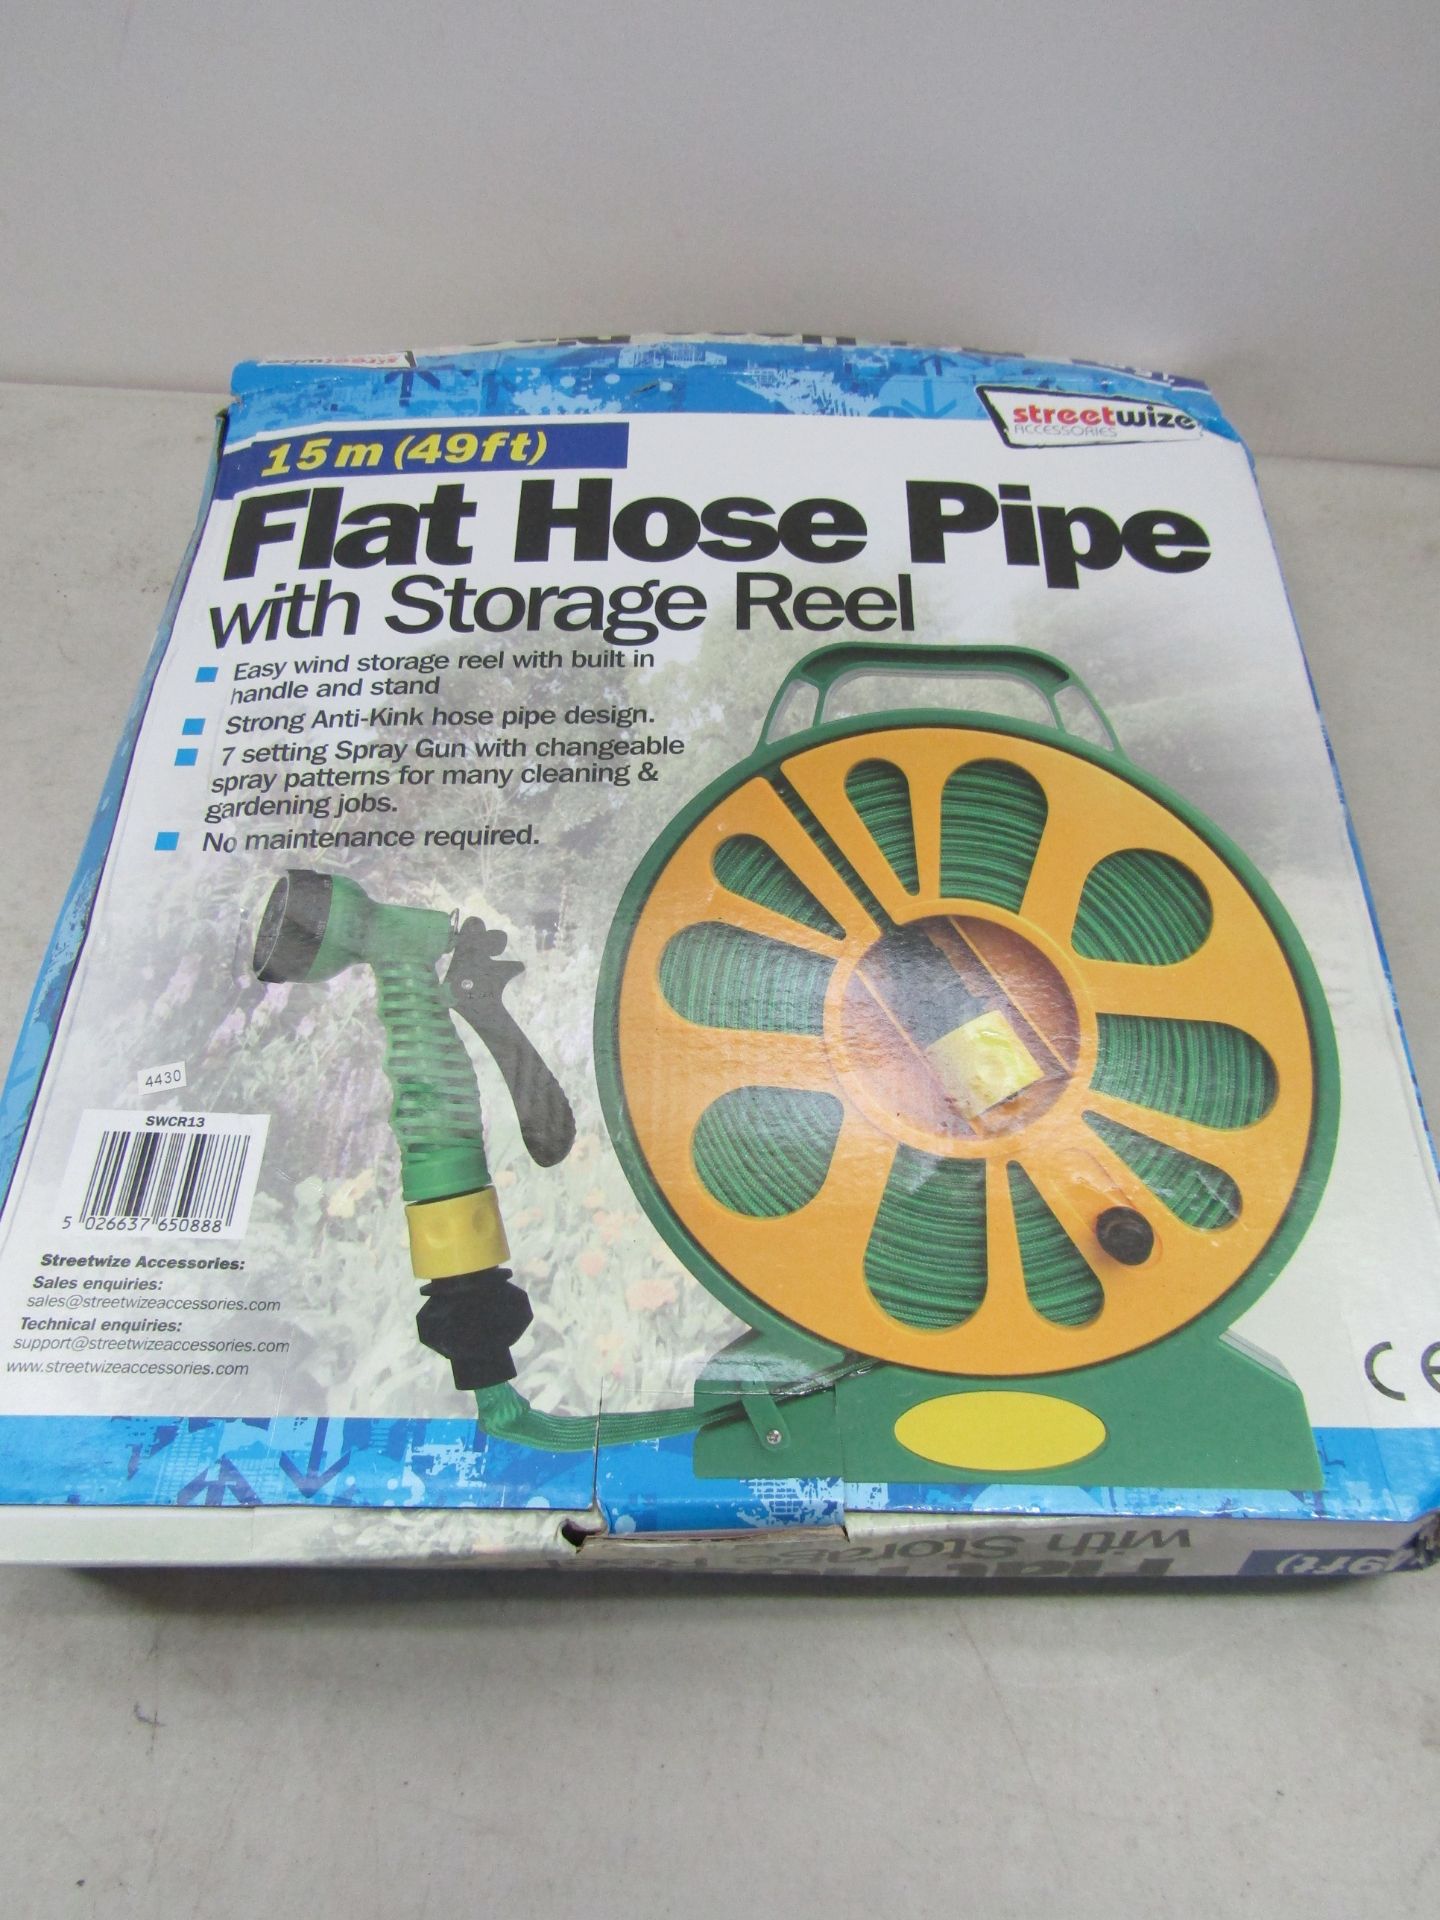 15M Flat hose pipe with storage reel, unused and boxed.